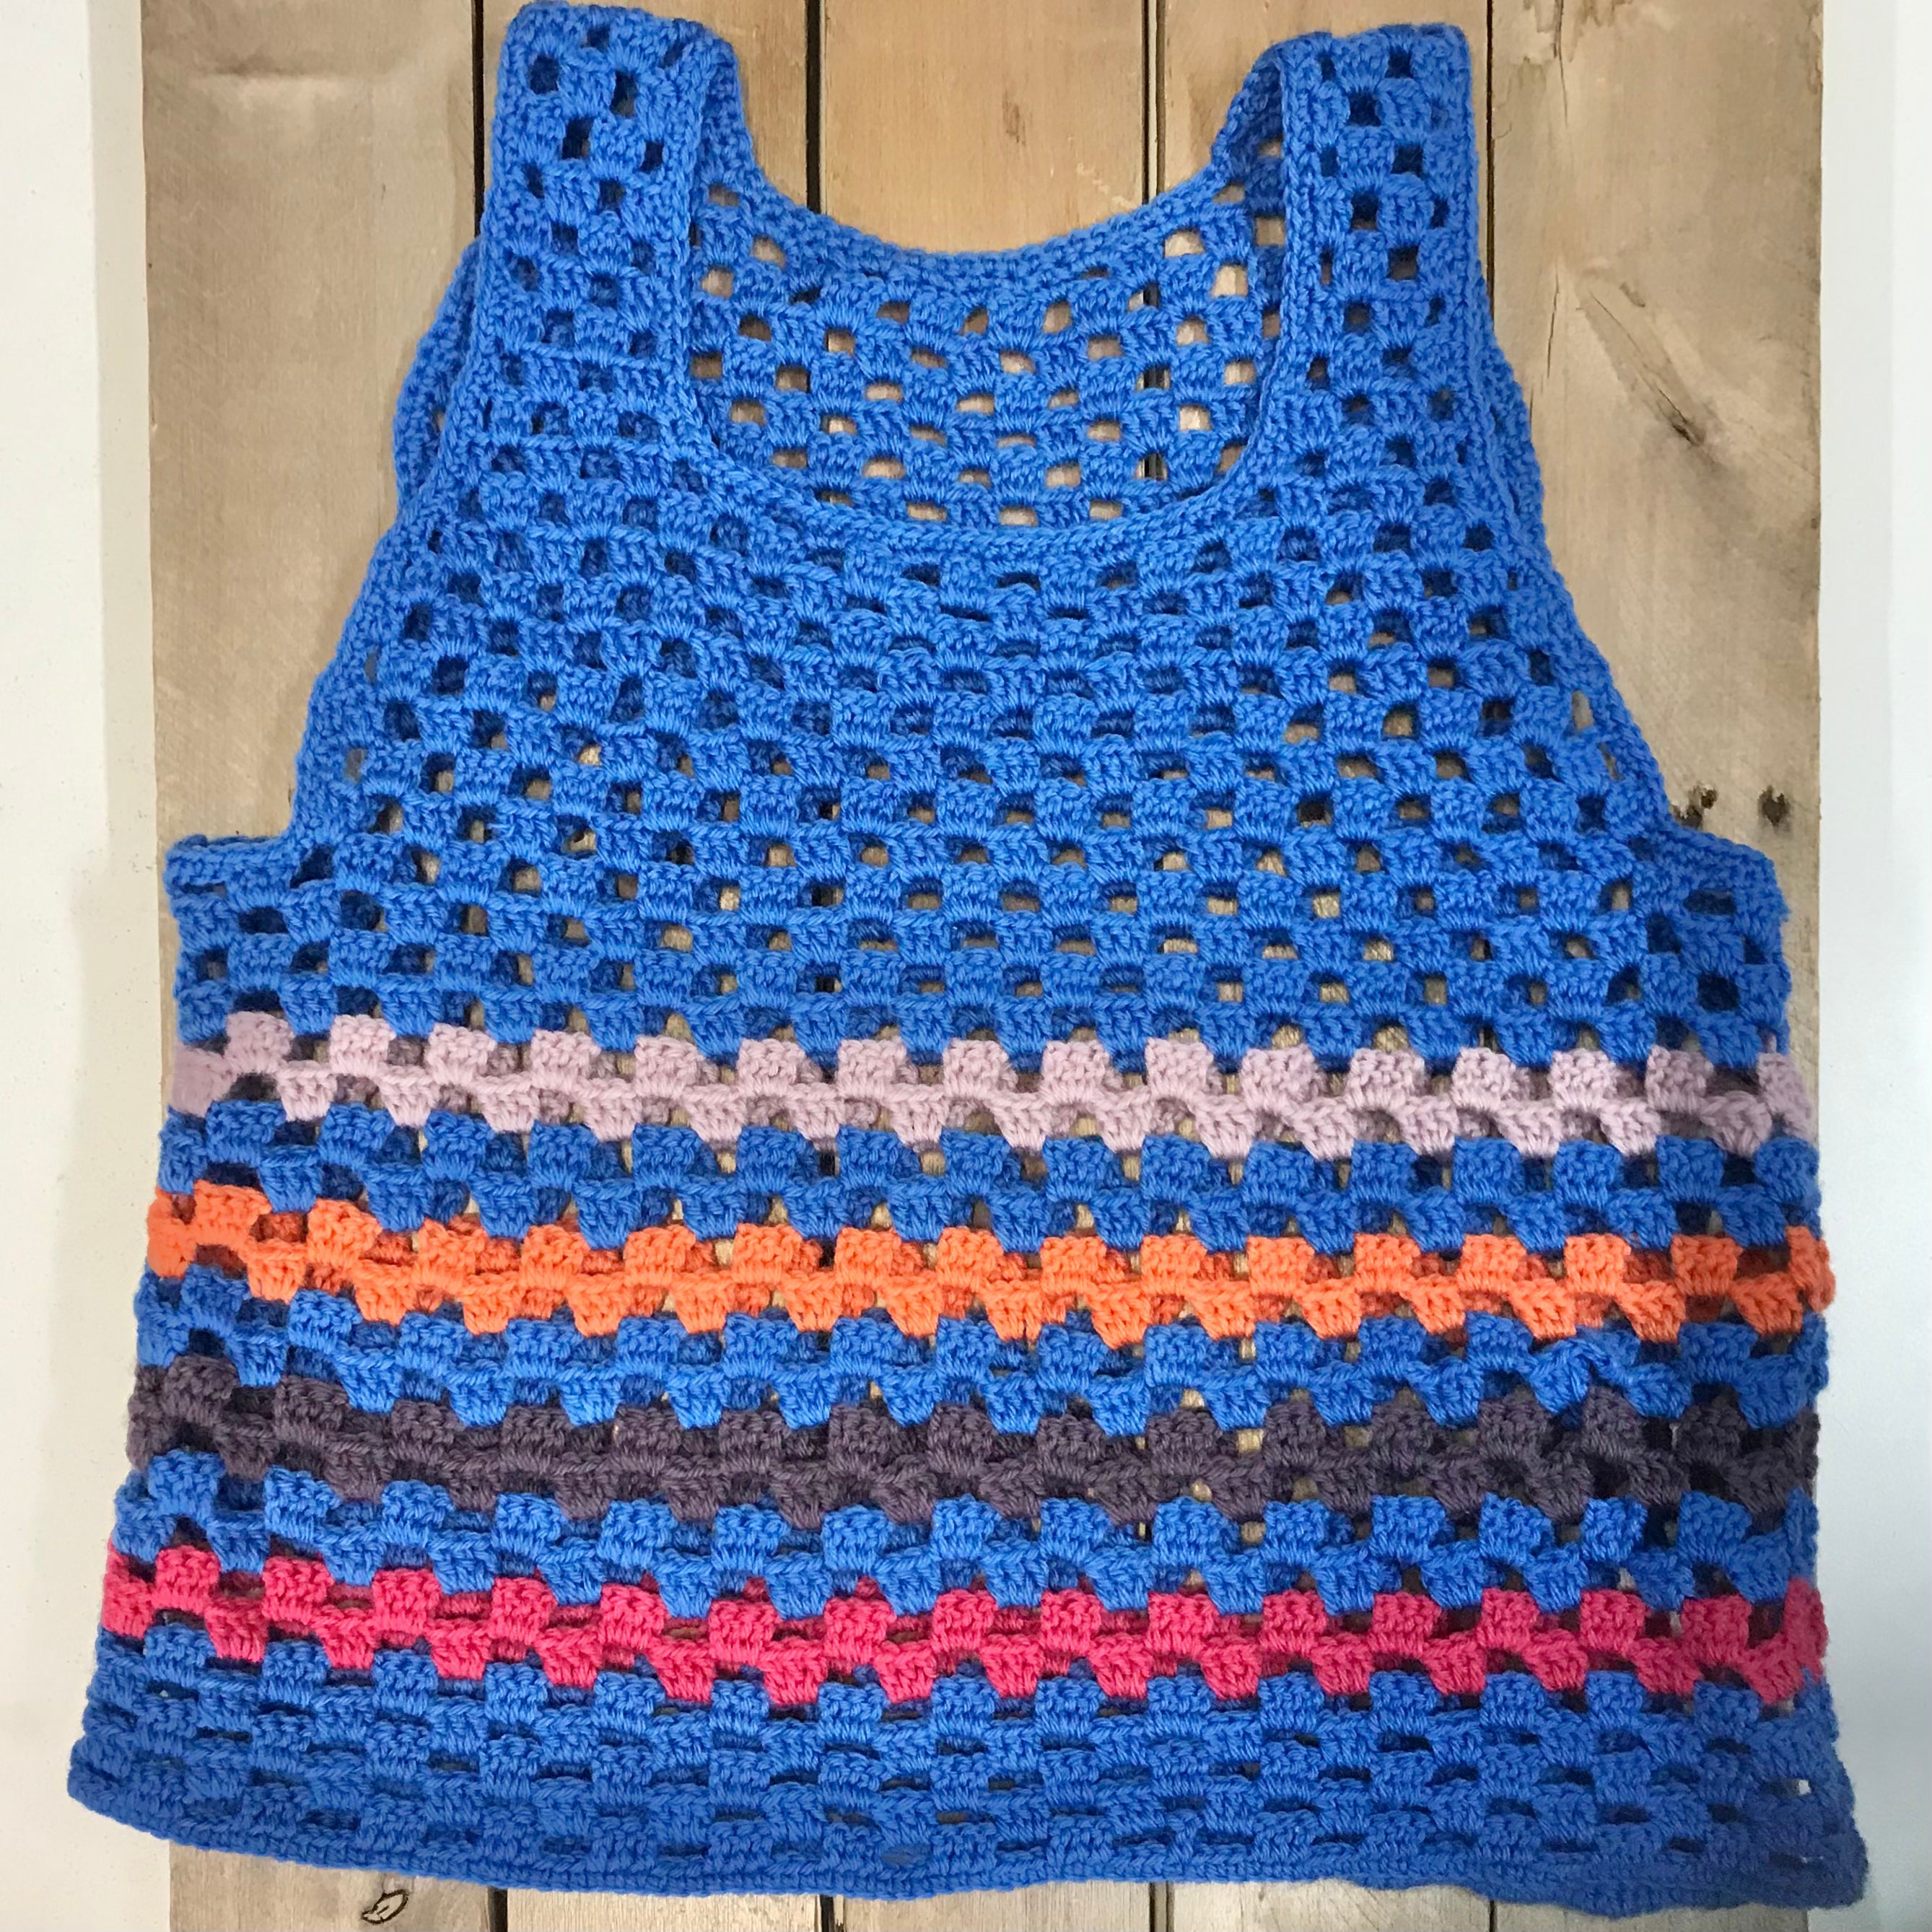 hand-knitted locally - adult crochet singlet vest top